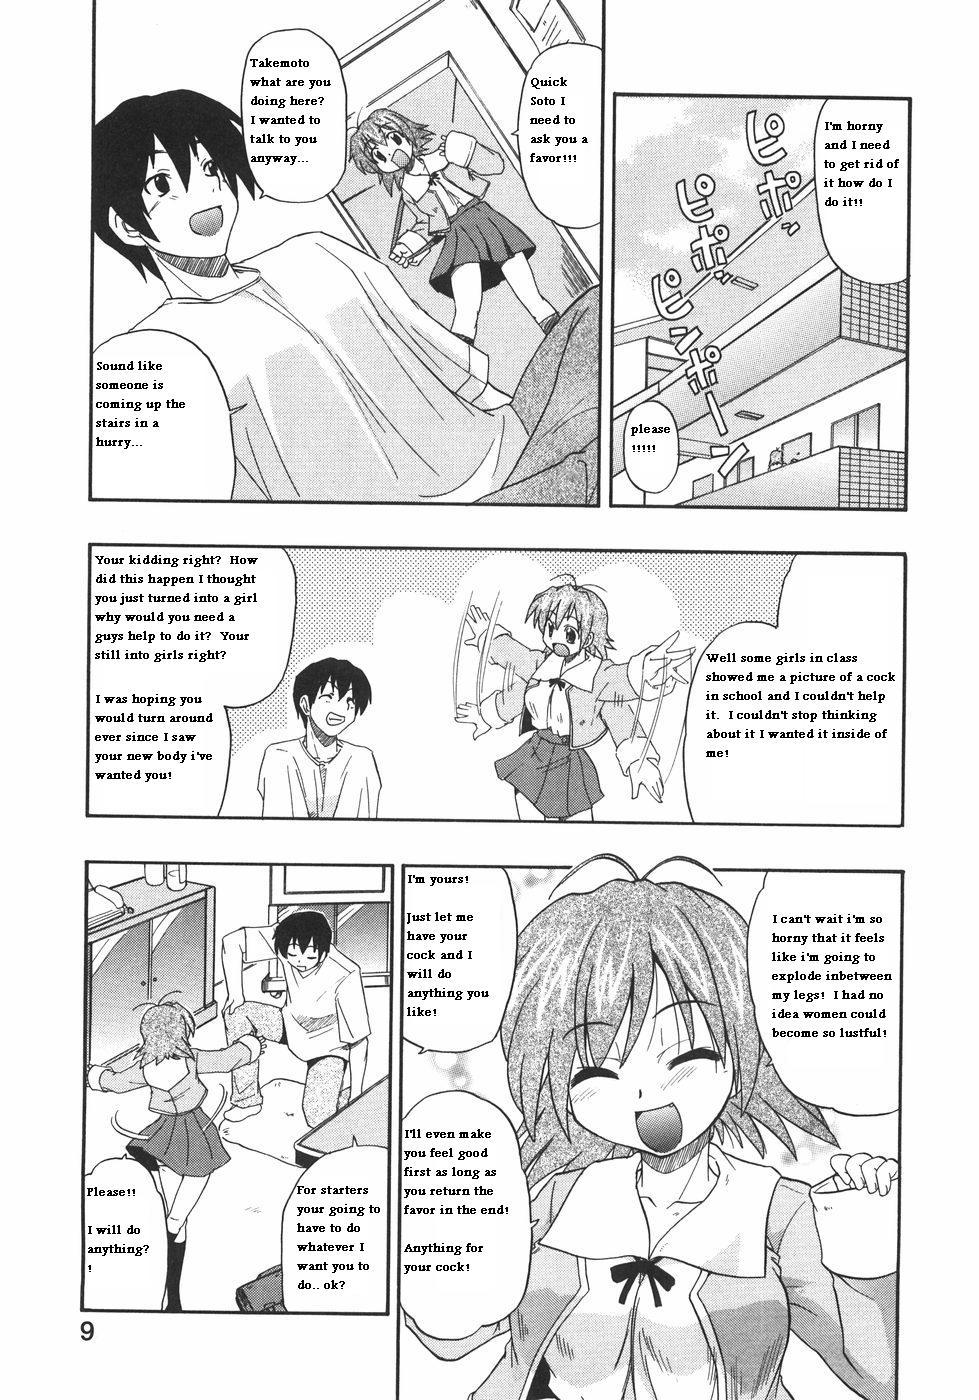 Amature Allure The New Girl Sucks - Page 5